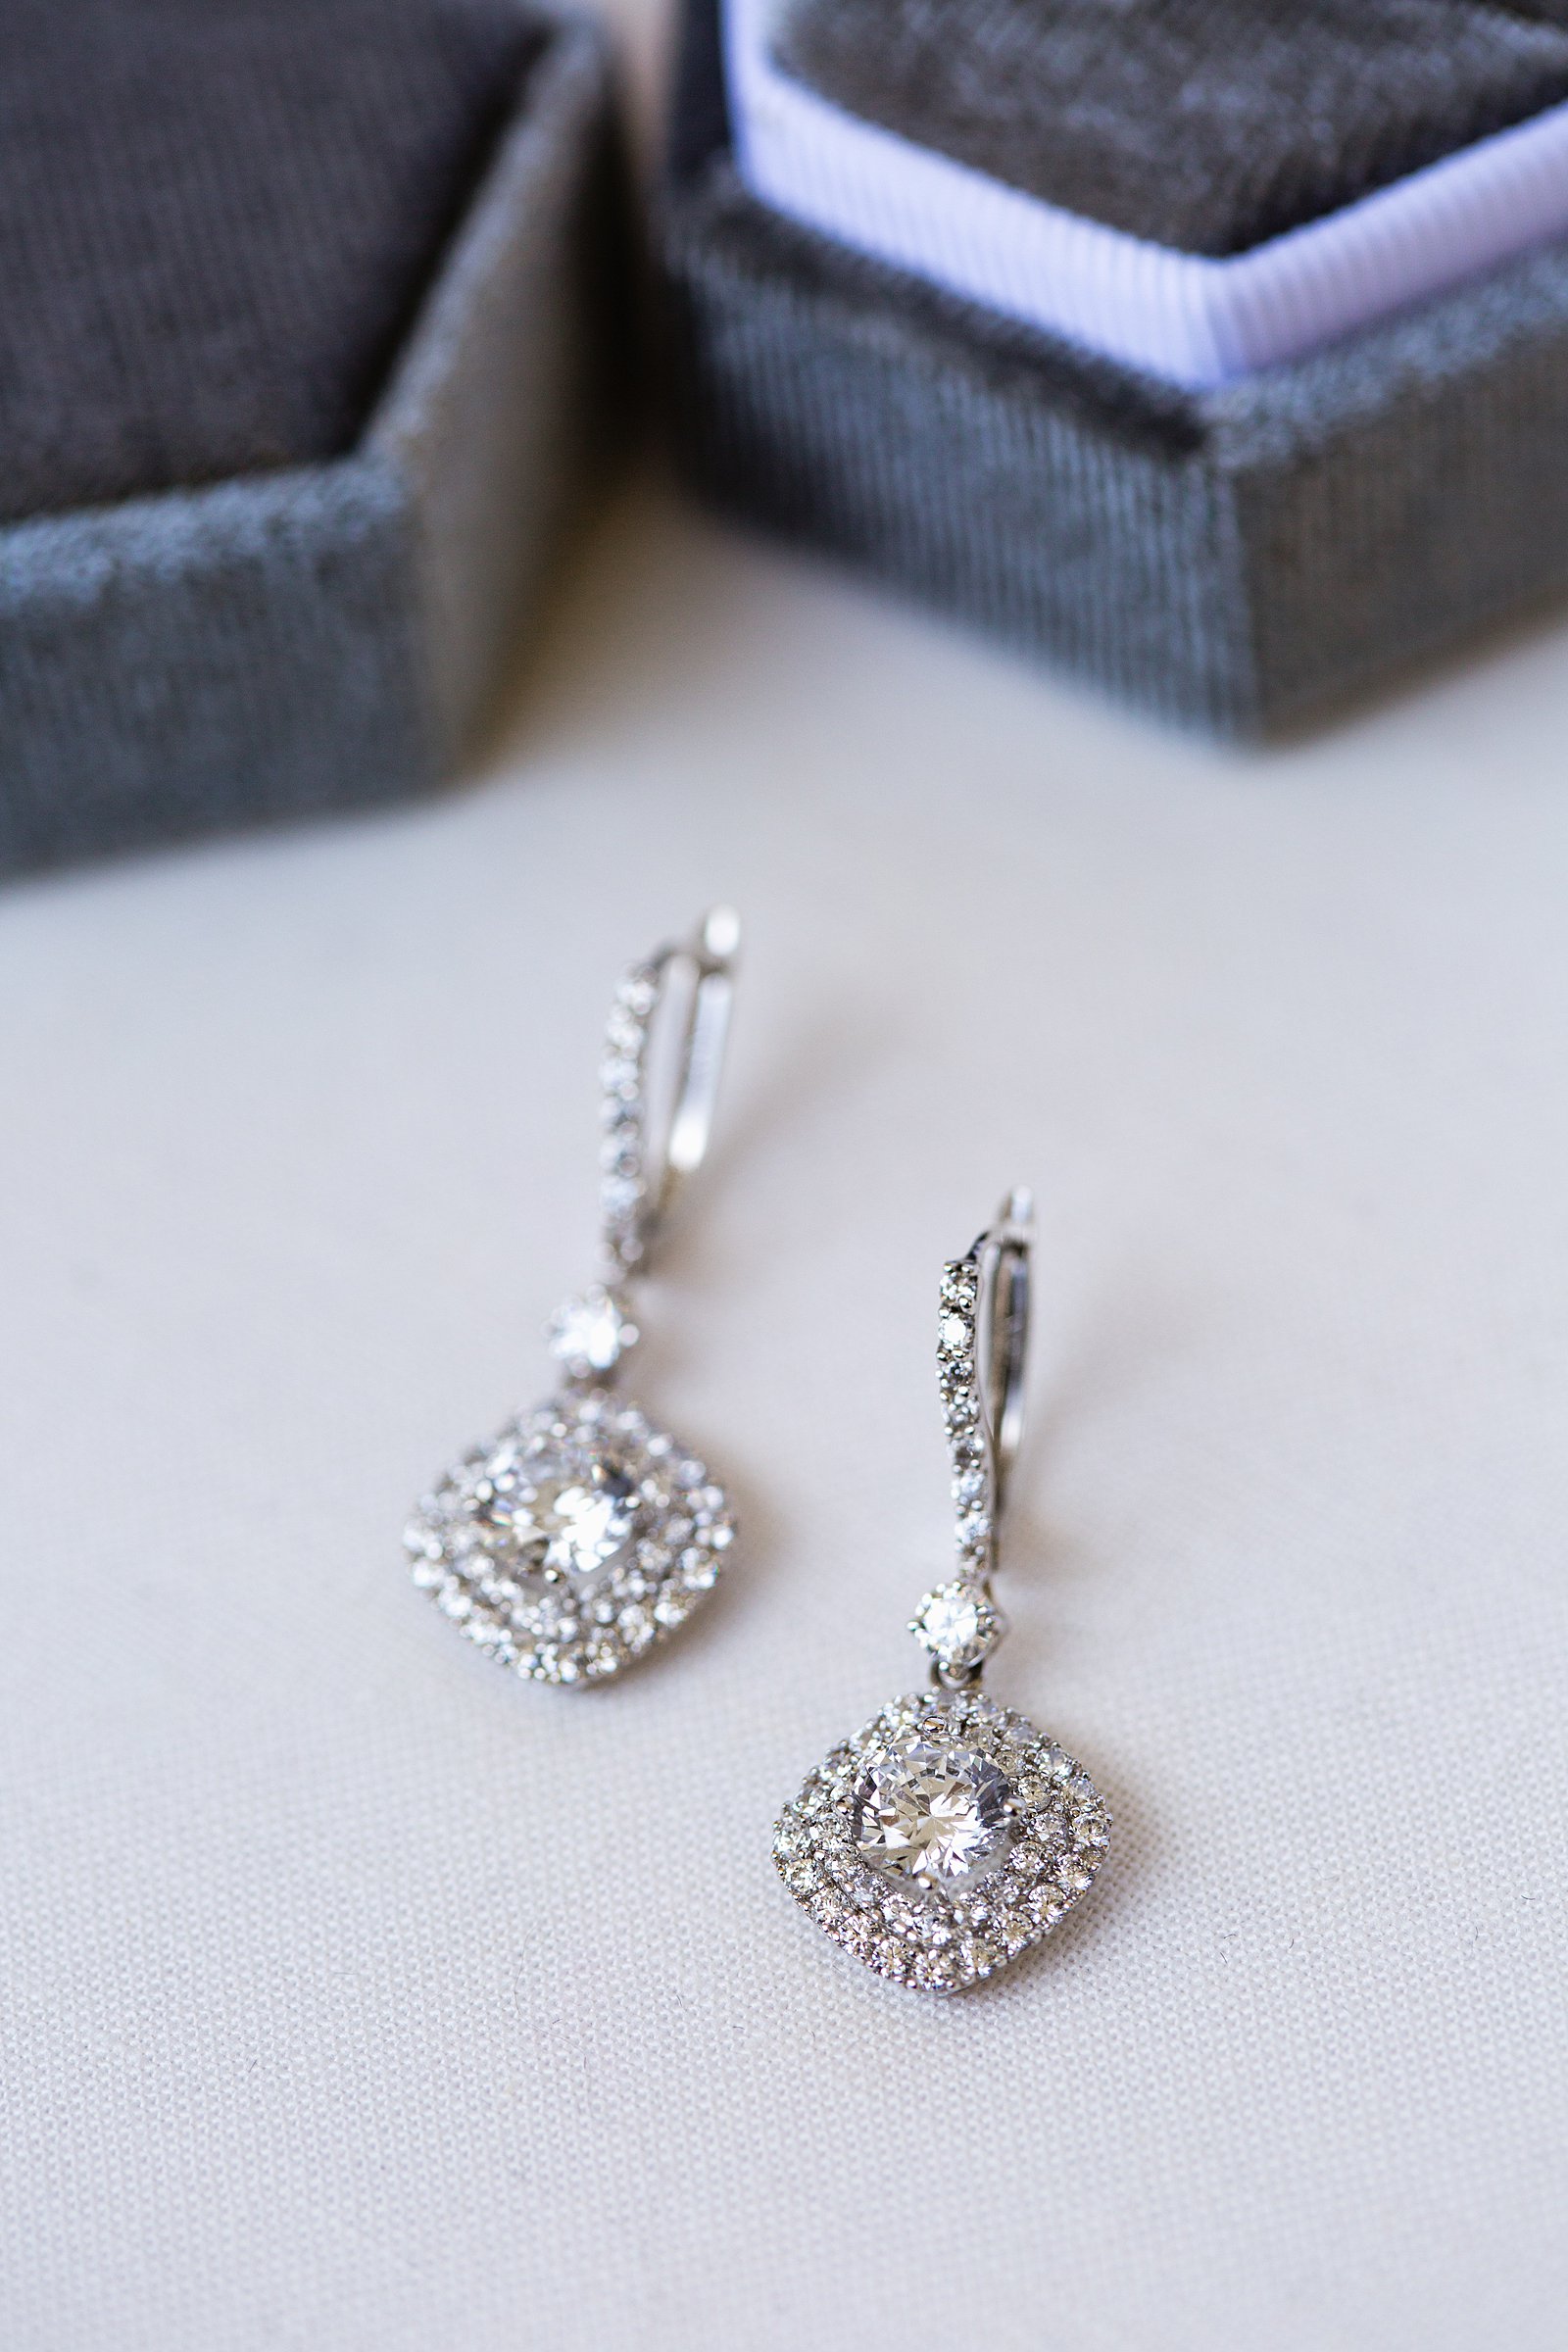 Brides's wedding day details of drop earrings by PMA Photography.